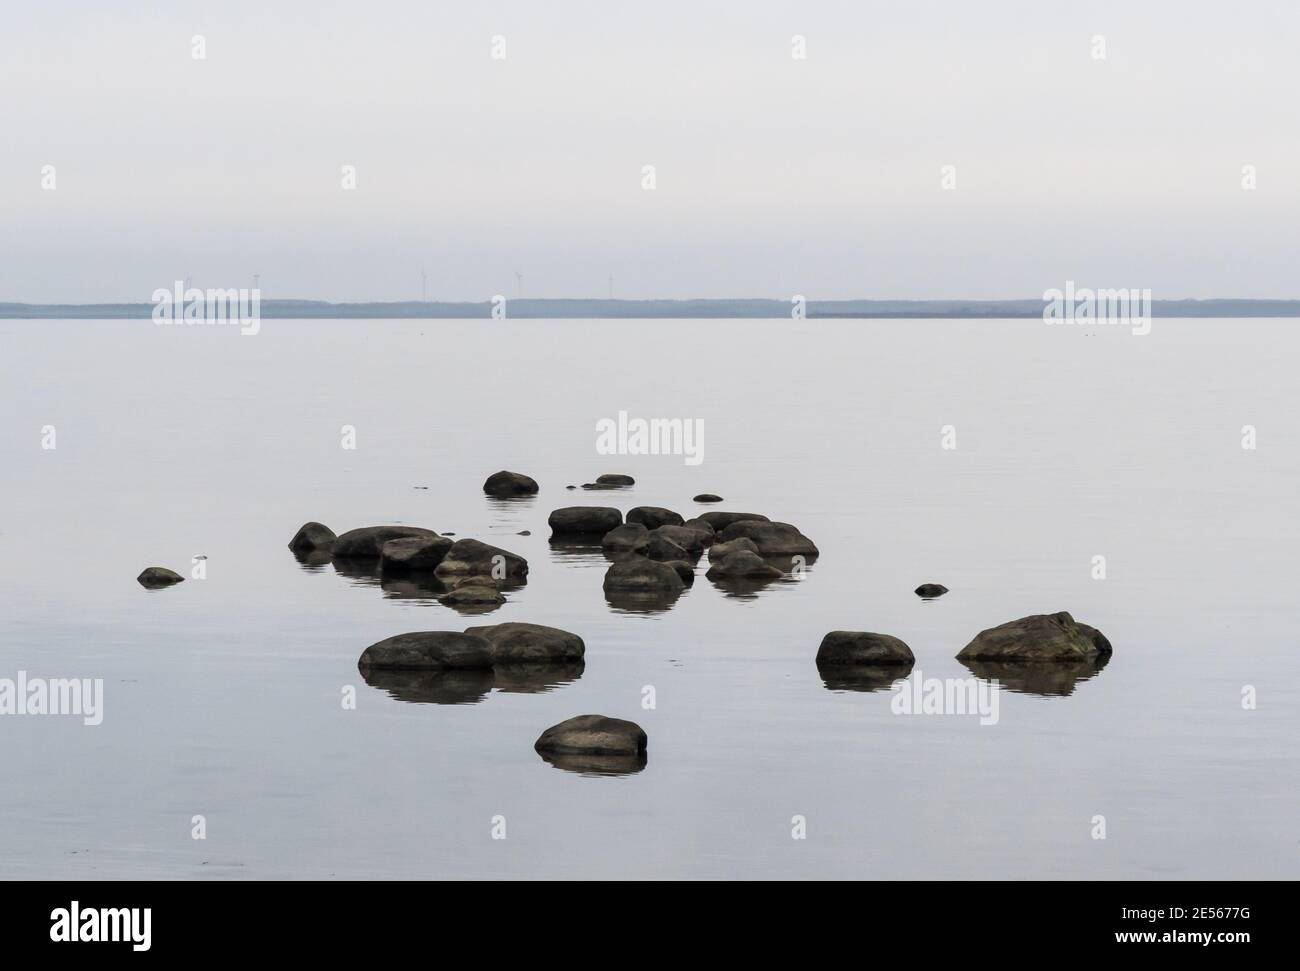 Scene with rocks in calm water in a bay of the Baltic Sea Stock Photo